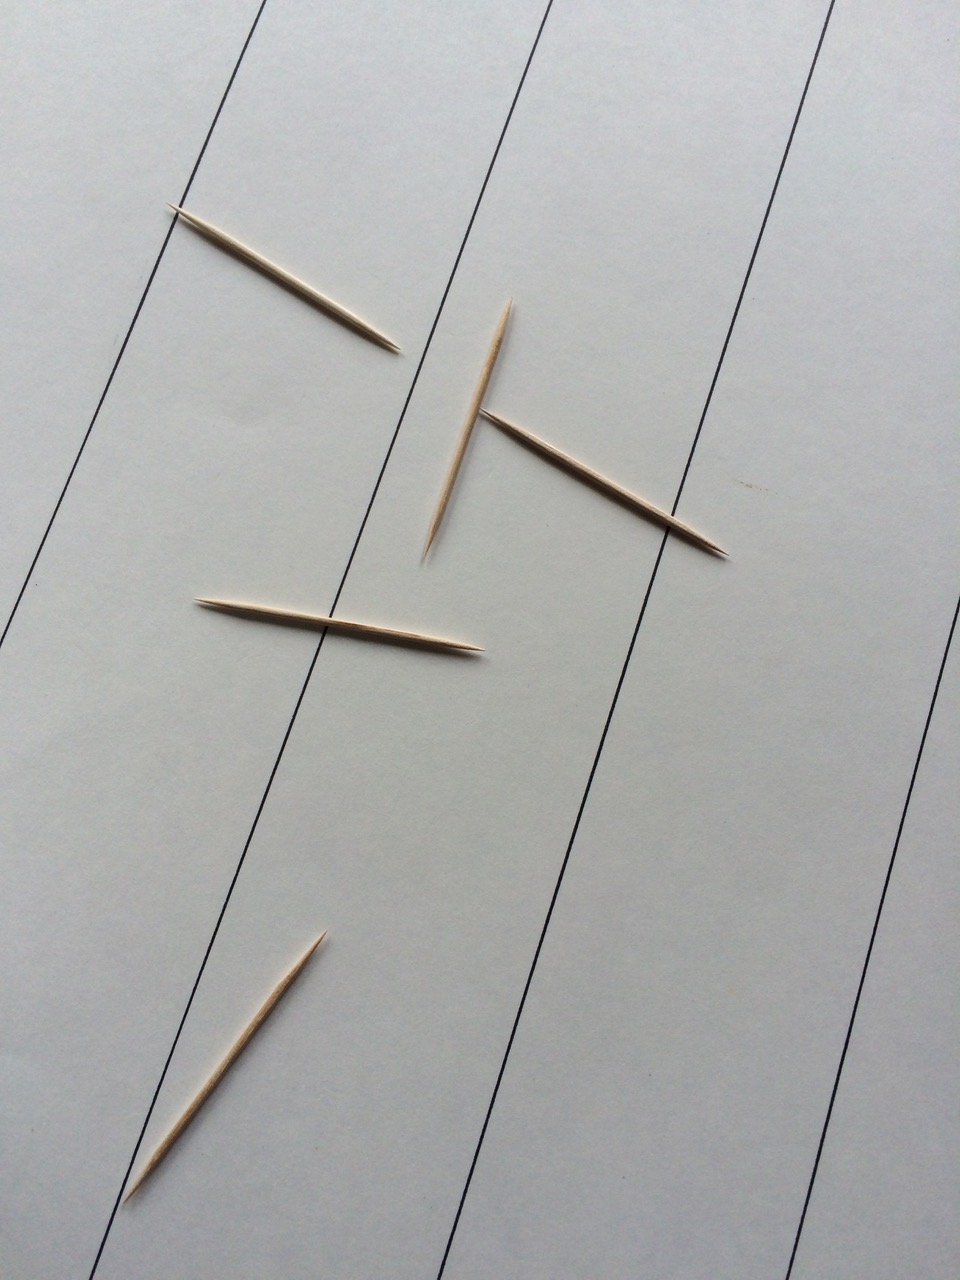 Five toothpicks scattered on a piece of paper with parallel lines drawn across it. Some of the toothpicks cross those lines.